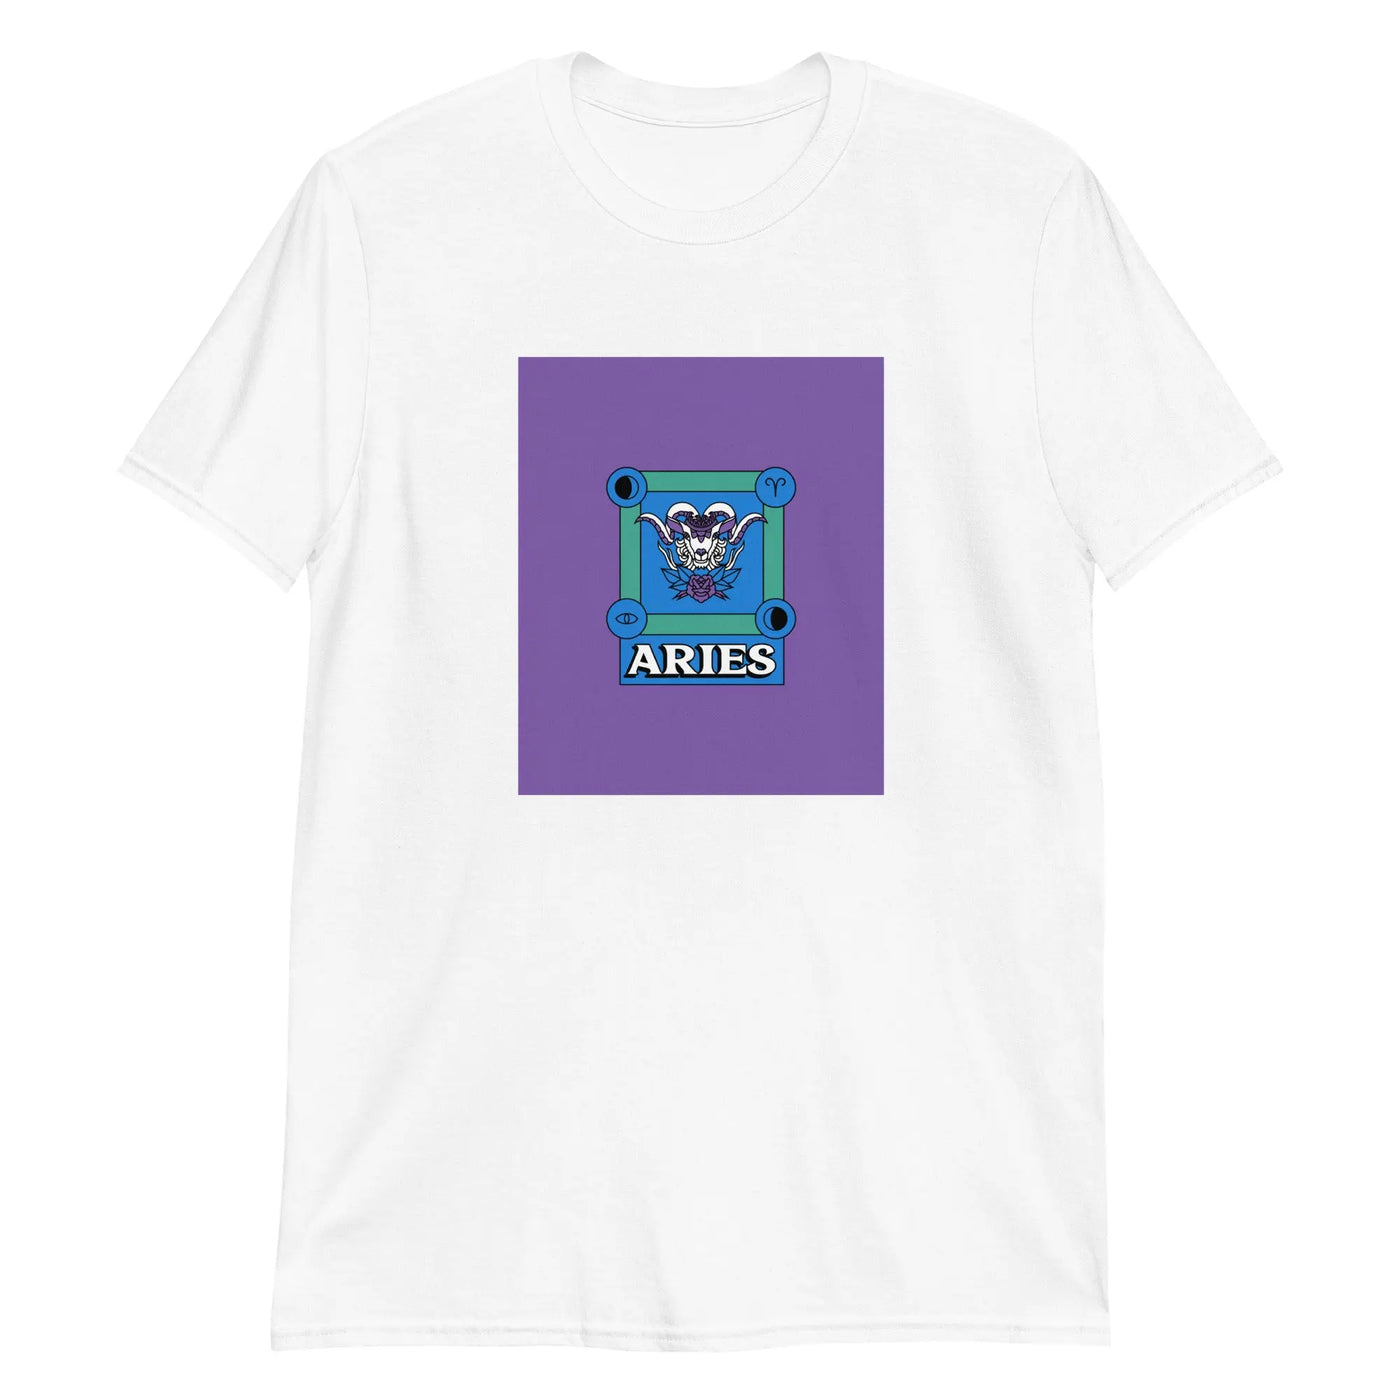 Aires Chinese Zodiac T-Shirt CRZYTEE